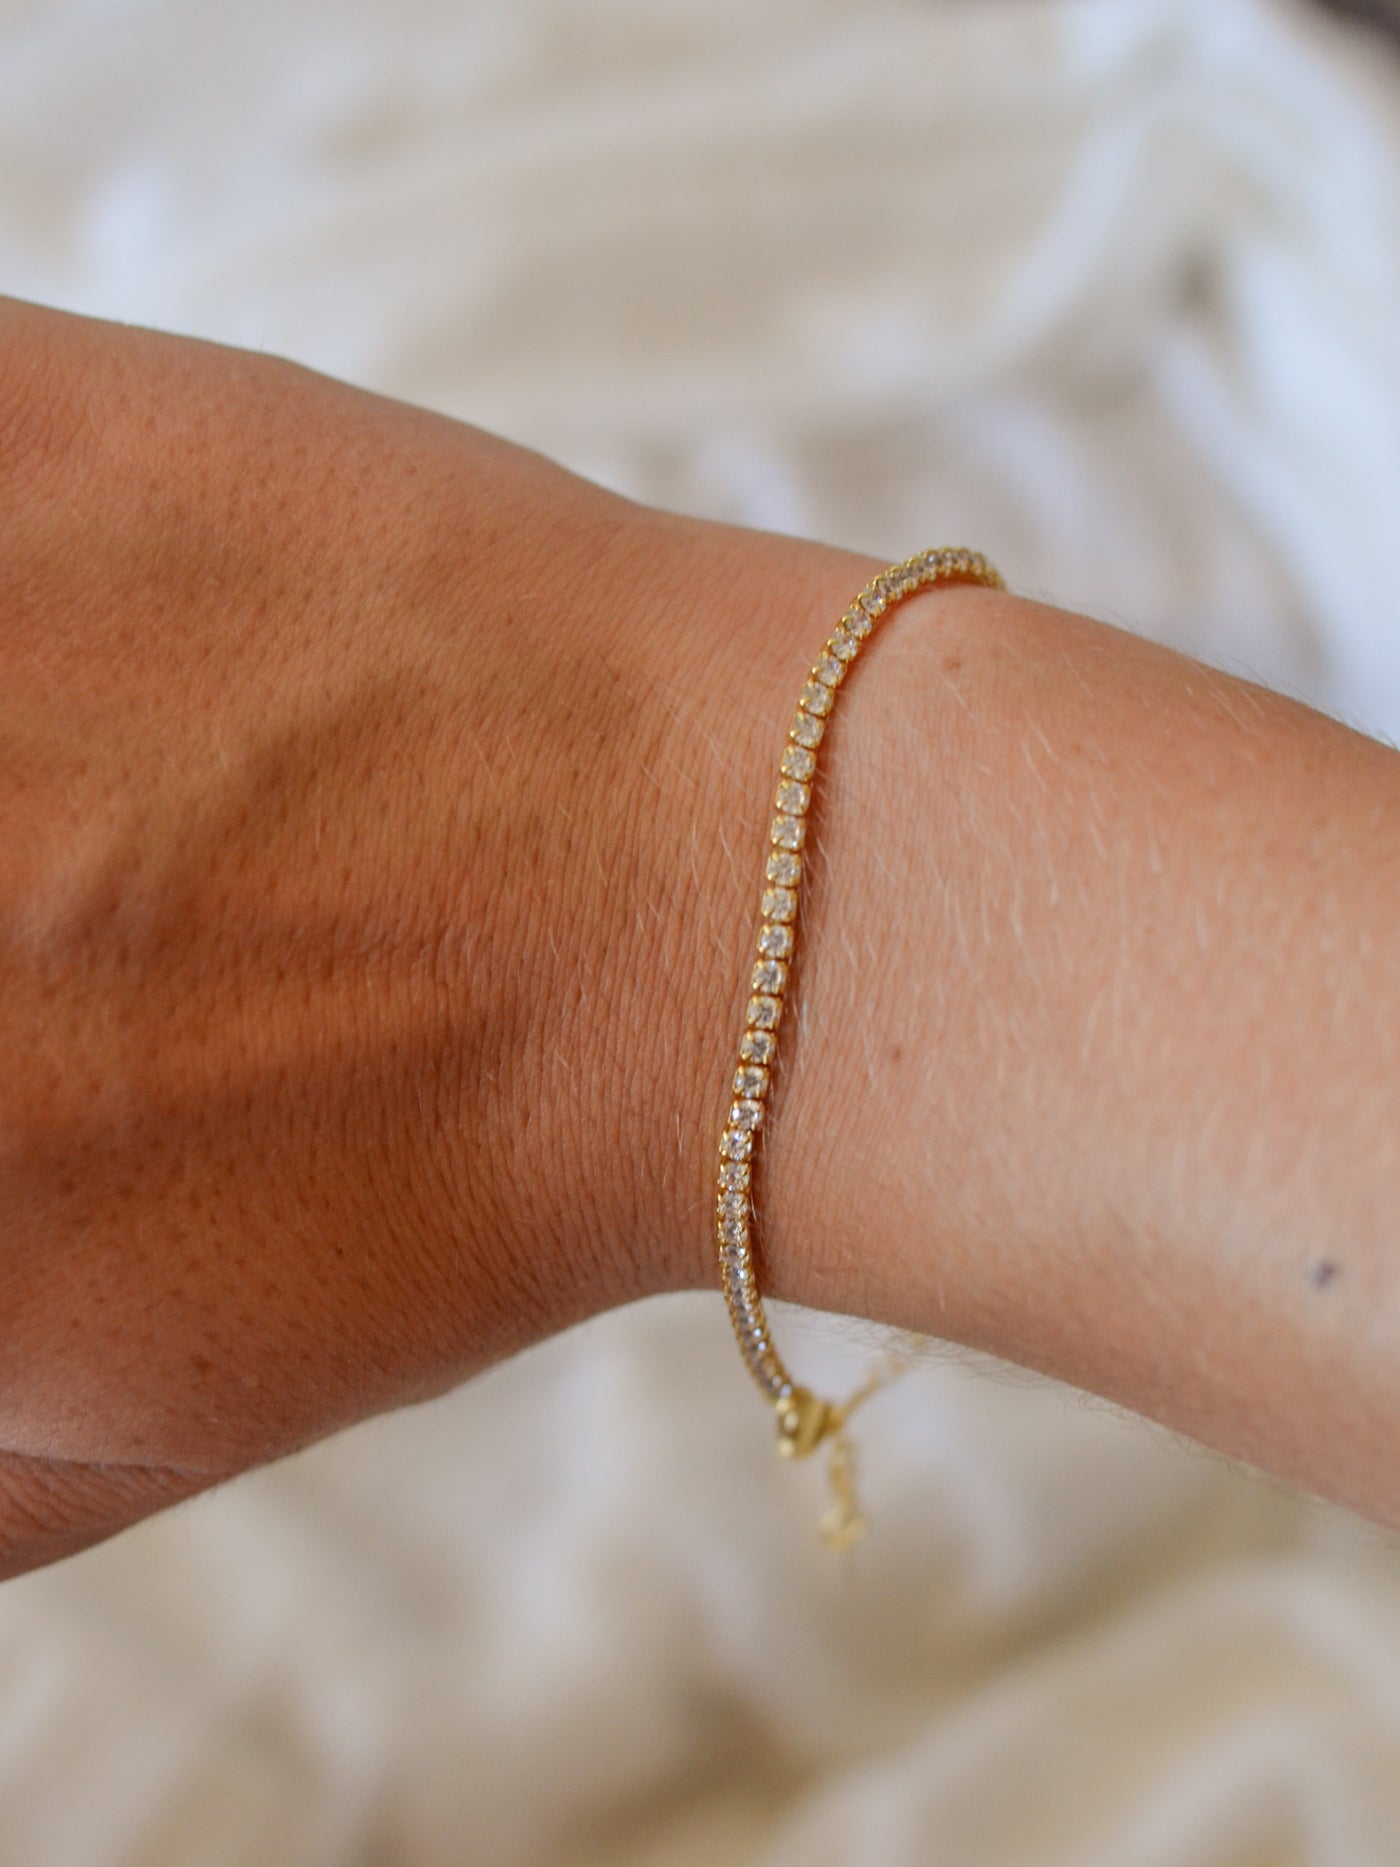 A gold chain tennis bracelet inlaid with cubic zirconia crystals.